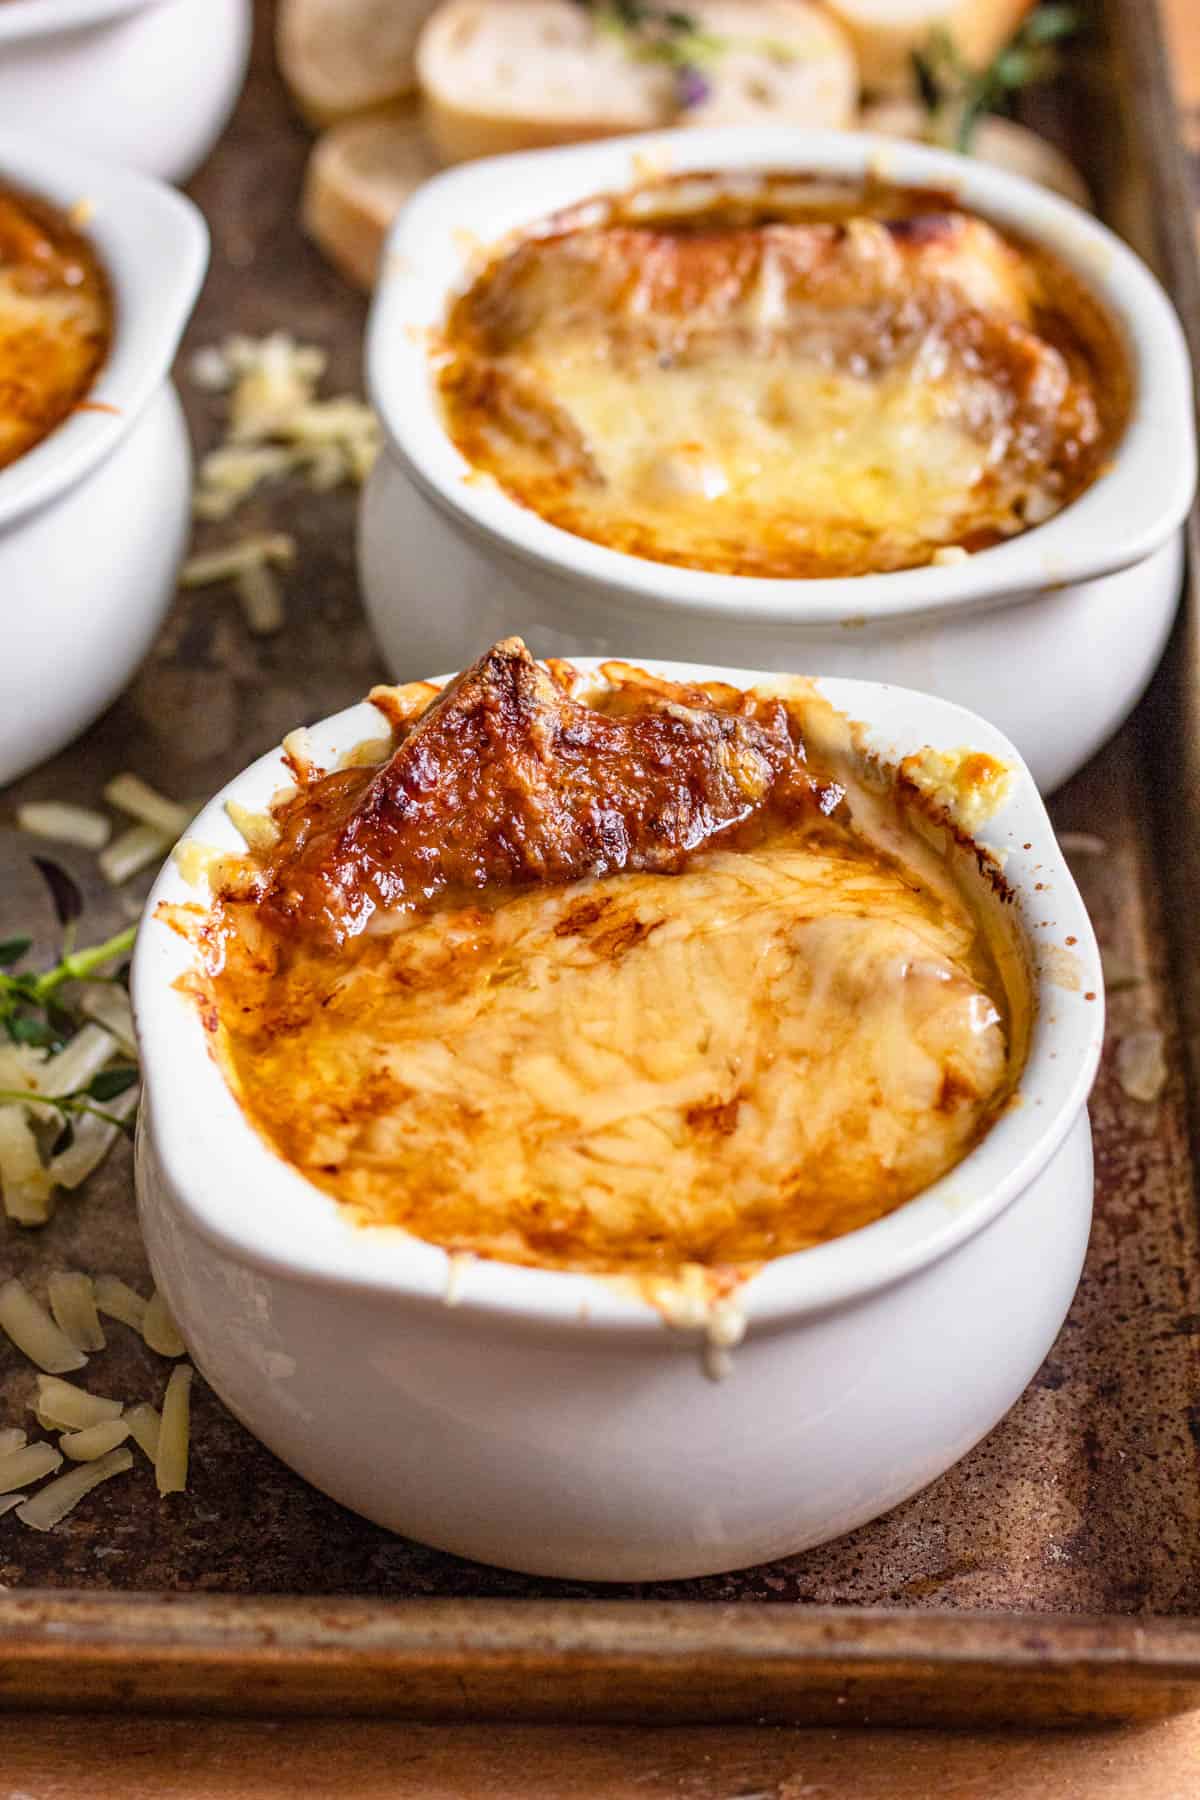 Soup crocks of French onion soup with melted cheese over bread soaked in rich beef broth. 